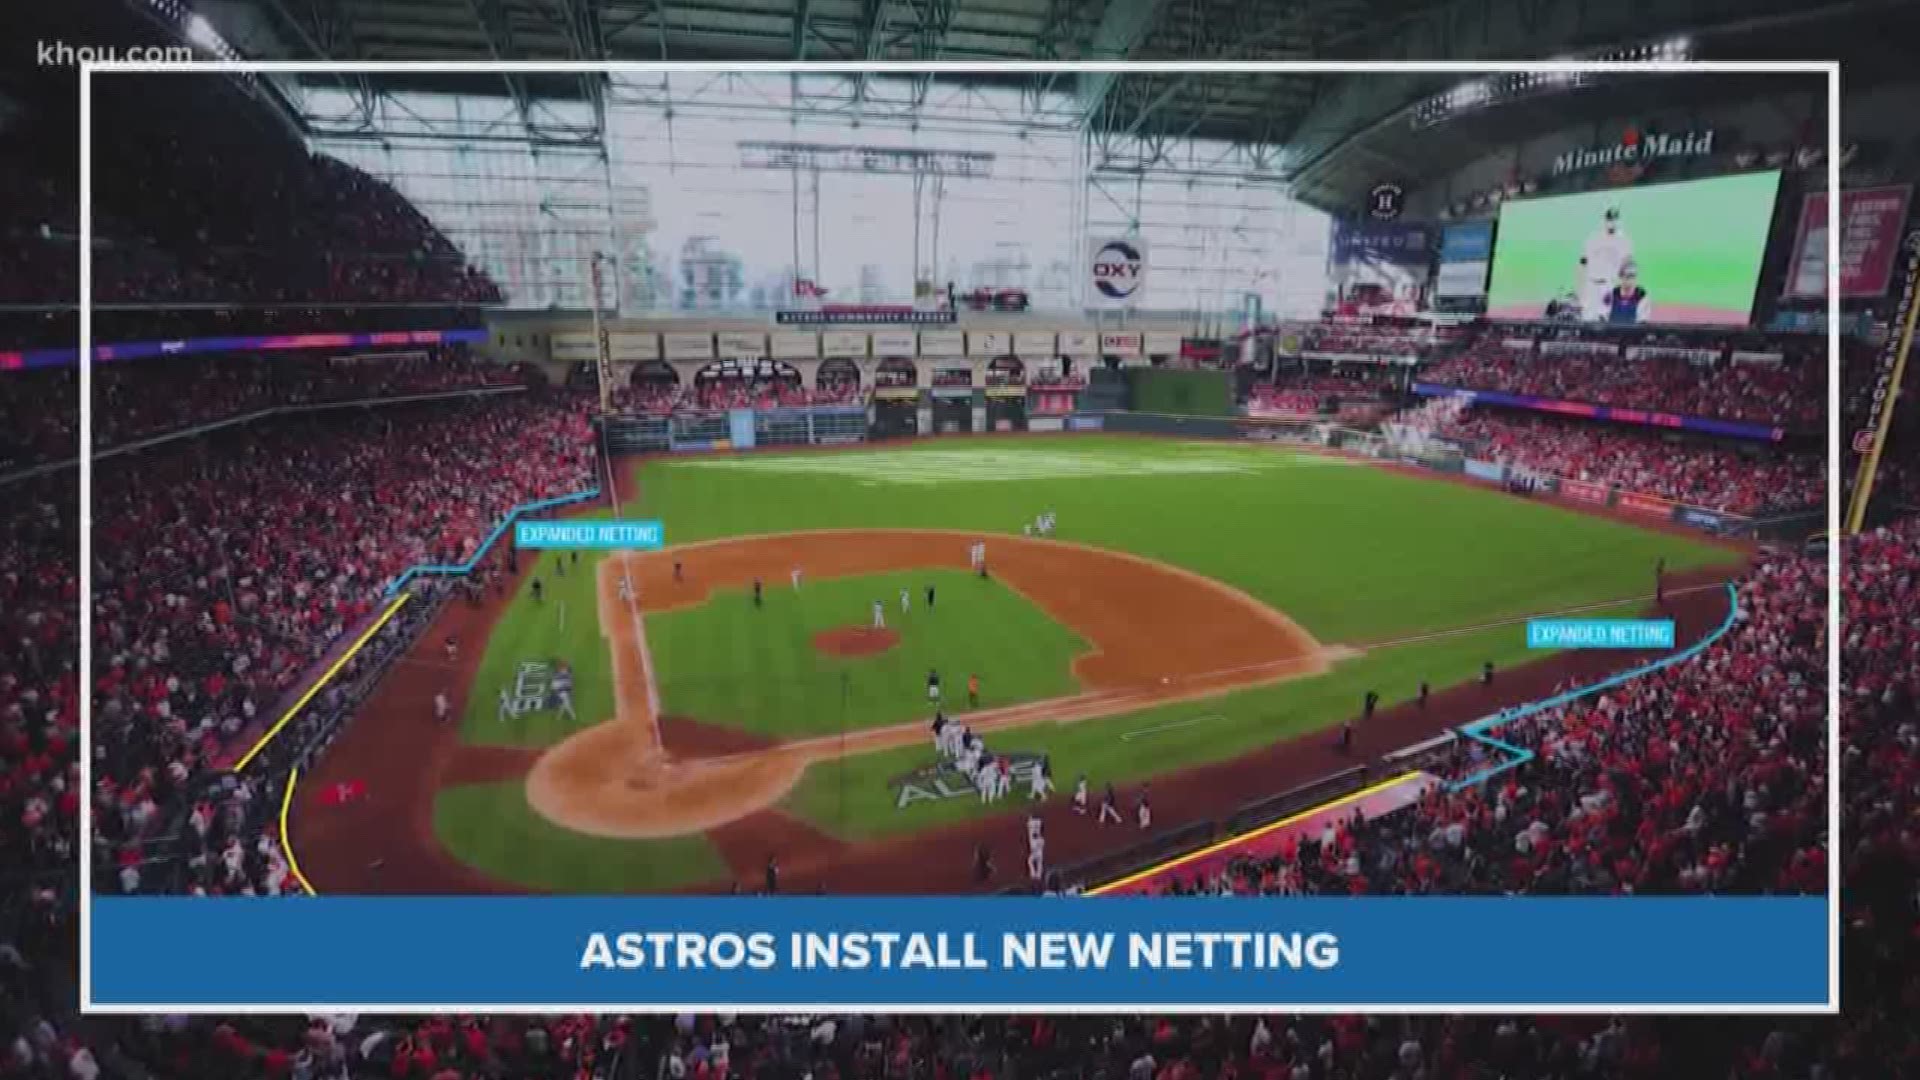 The Astros install new netting at the ballpark, a man is shot and killed in North Houston and there is a chance of rain in the forecast this afternoon, these are some of the top headlines from #HTownRush at 4:30 a.m.